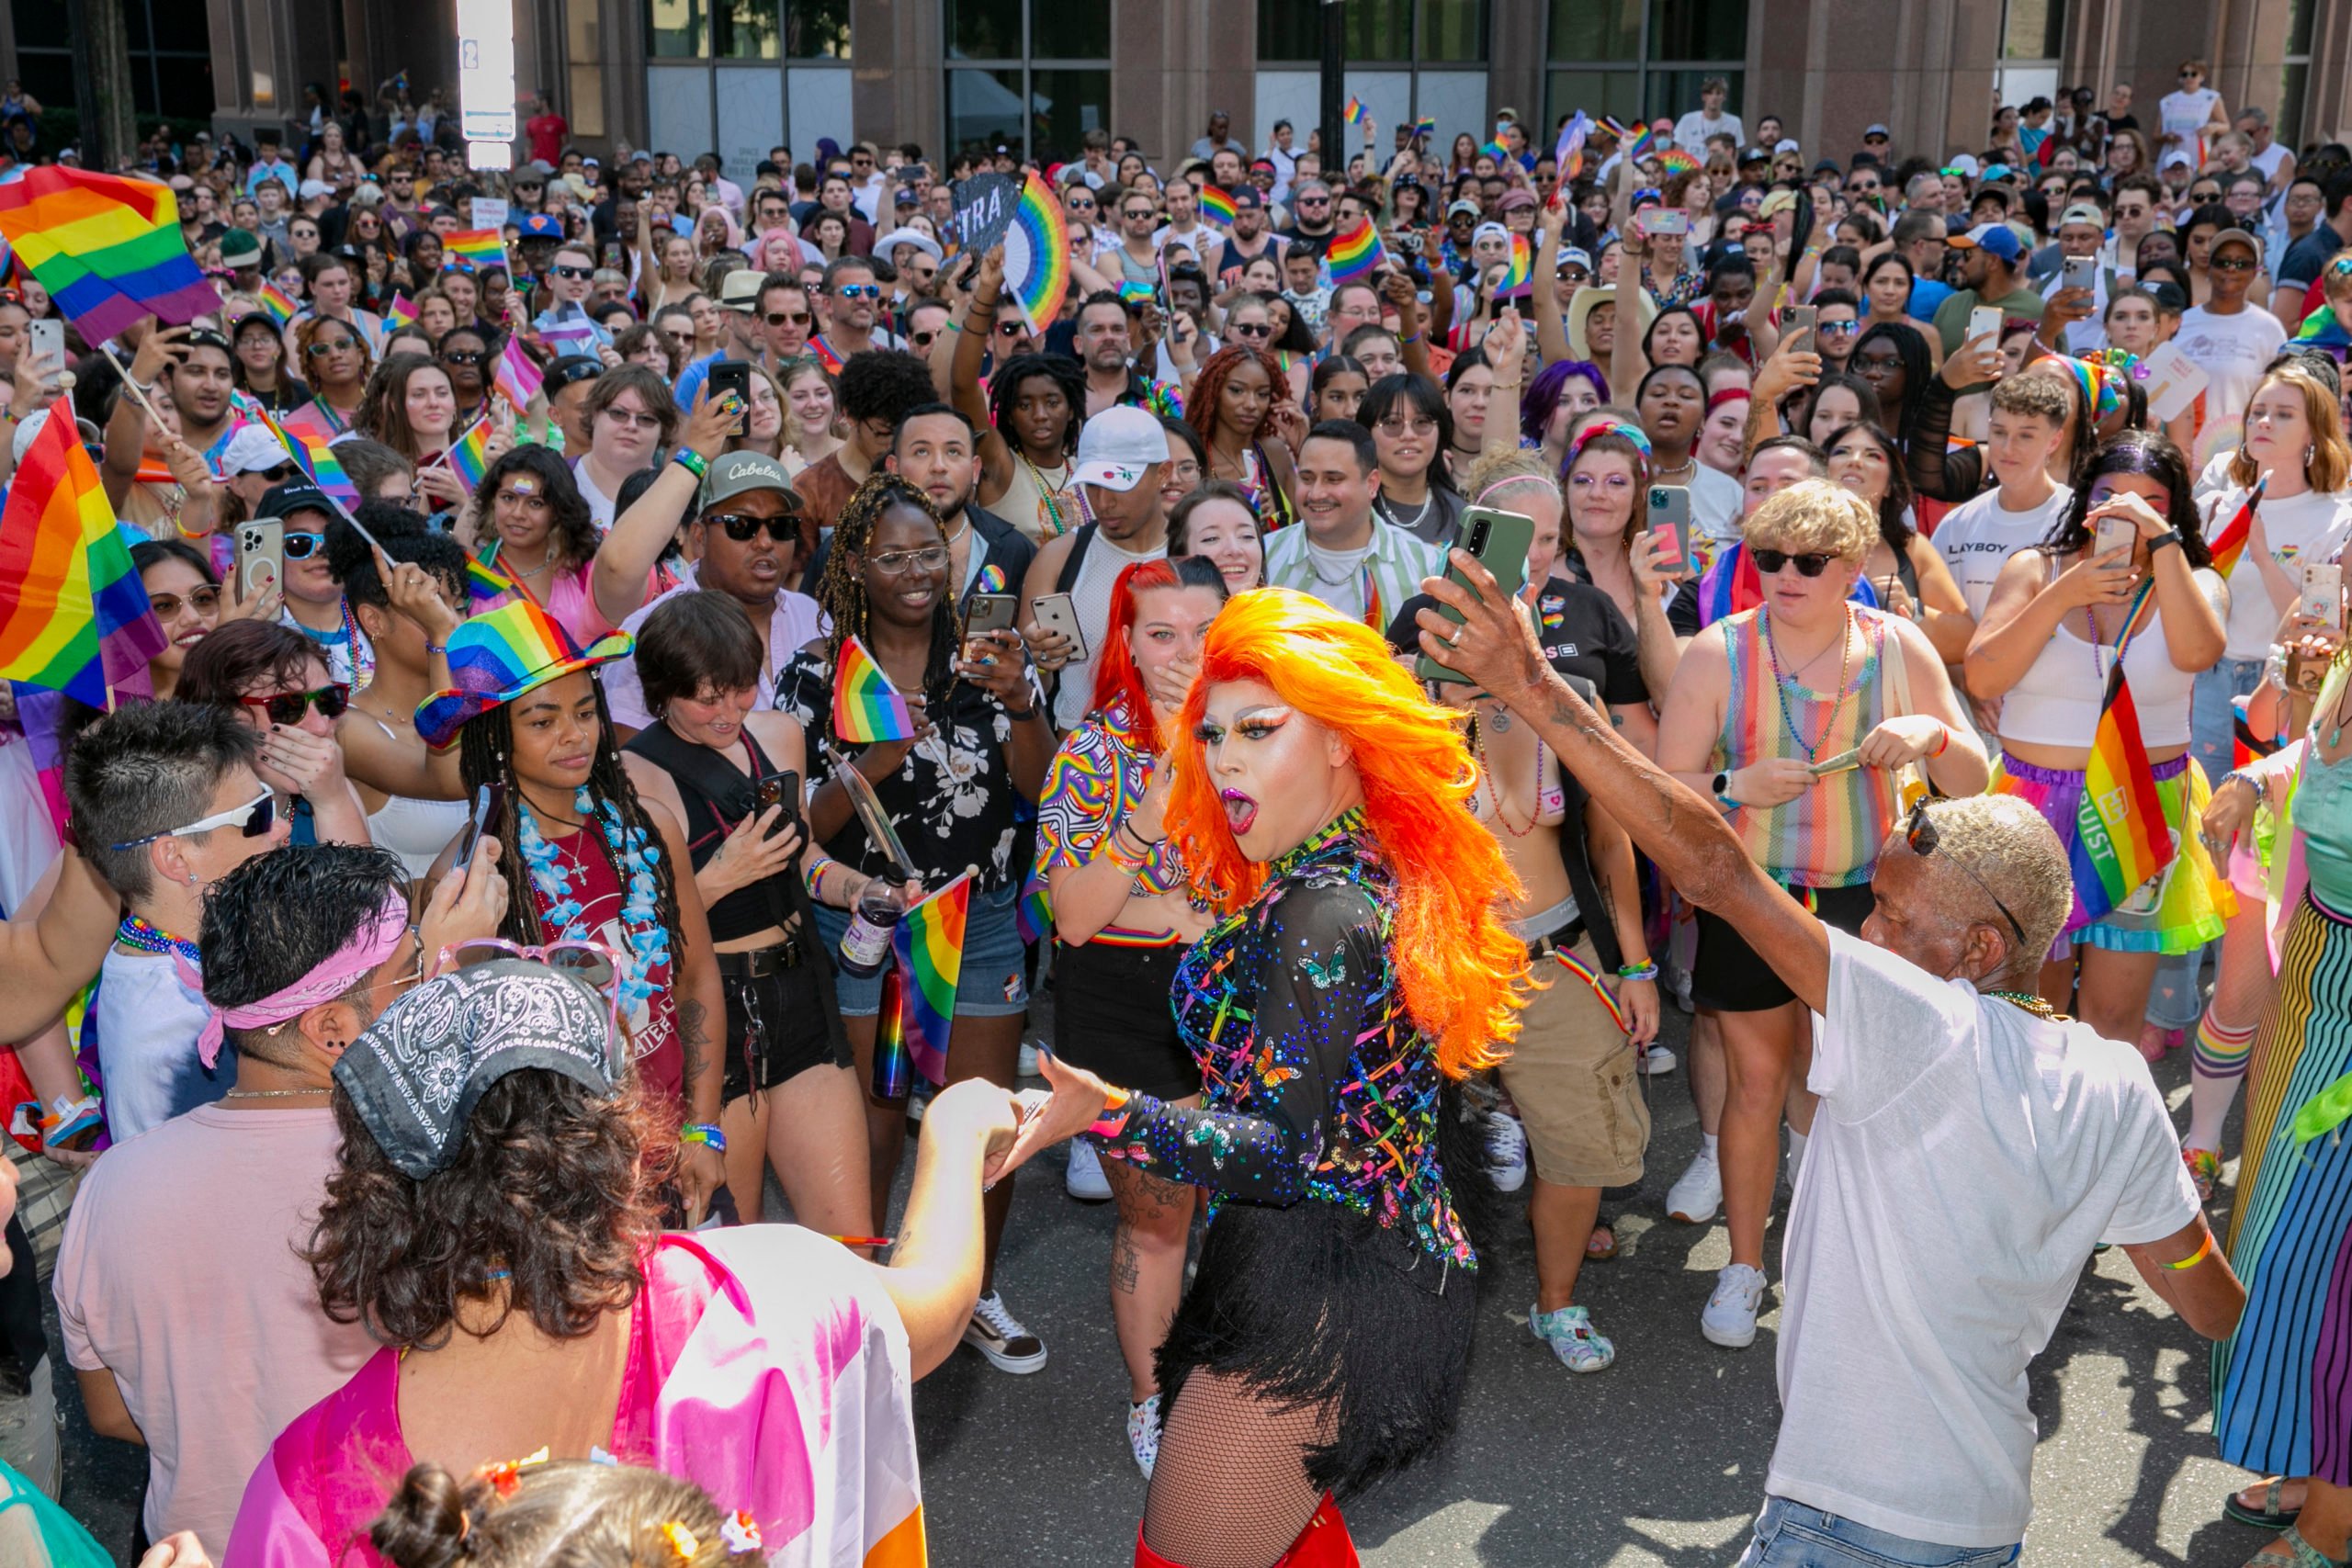 A drag queen performs during celebrations for Pride month on June 25, 2022, in Raleigh, North Carolina. - A written opinion by one justice in the US Supreme Court's decision to bury abortion rights has ignited fears that other progressive gains, including same-sex marriage and contraception, could also be overturned. (Photo by Allison Joyce / AFP) (Photo by ALLISON JOYCE/AFP via Getty Images)